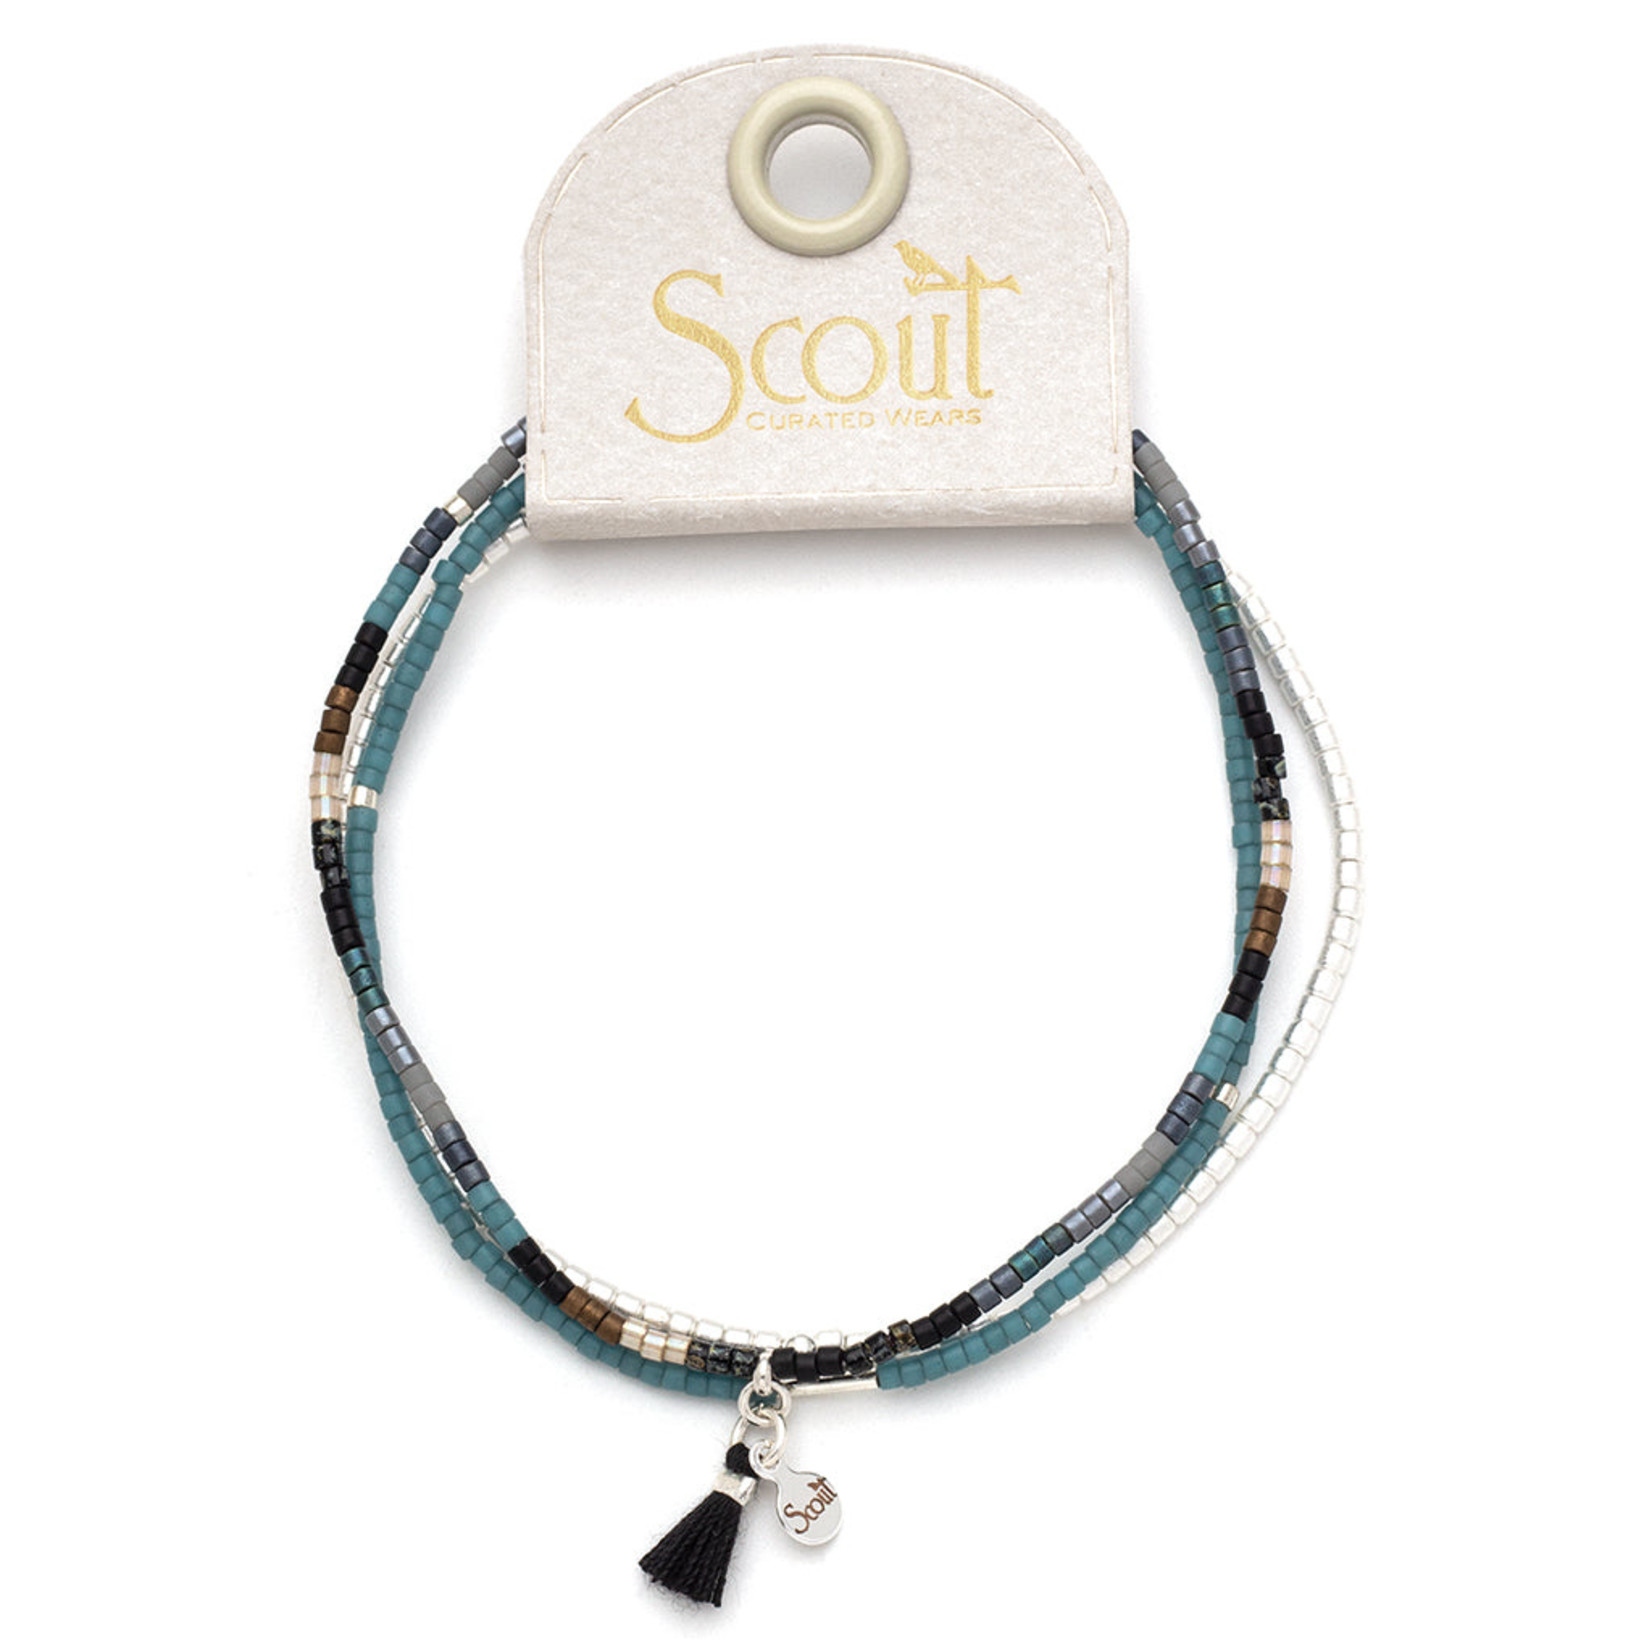 Scout Curated Wears Scout Curated Wears - Chromacolor Miyuki Bracelet Trio - Black Multi/Silver